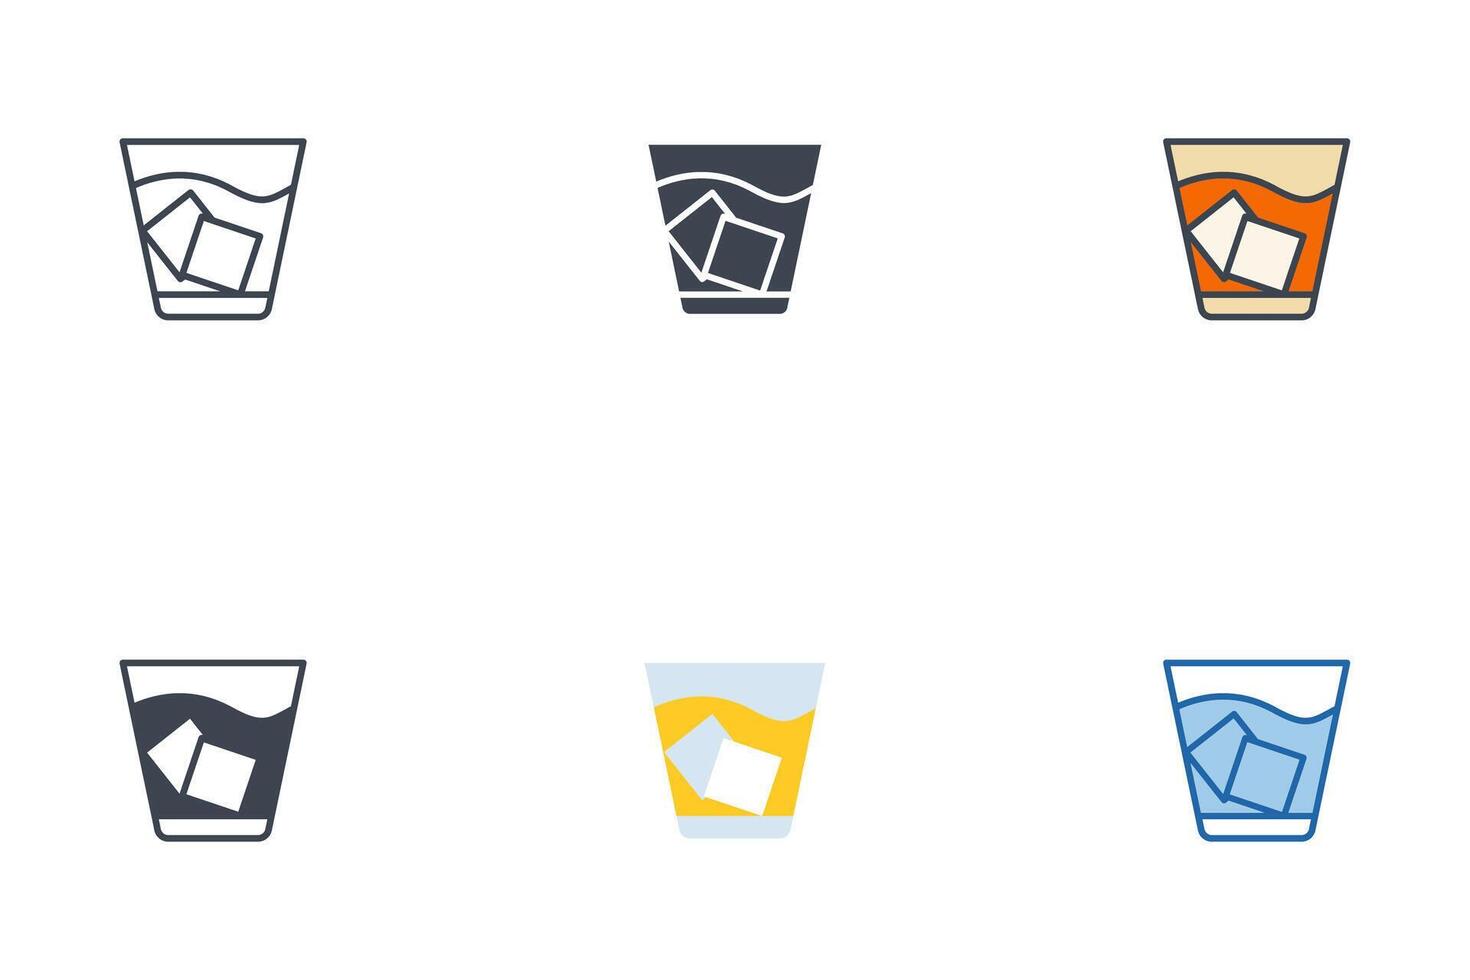 Whiskey Glass icons with different styles. Glass of whiskey symbol vector illustration isolated on white background